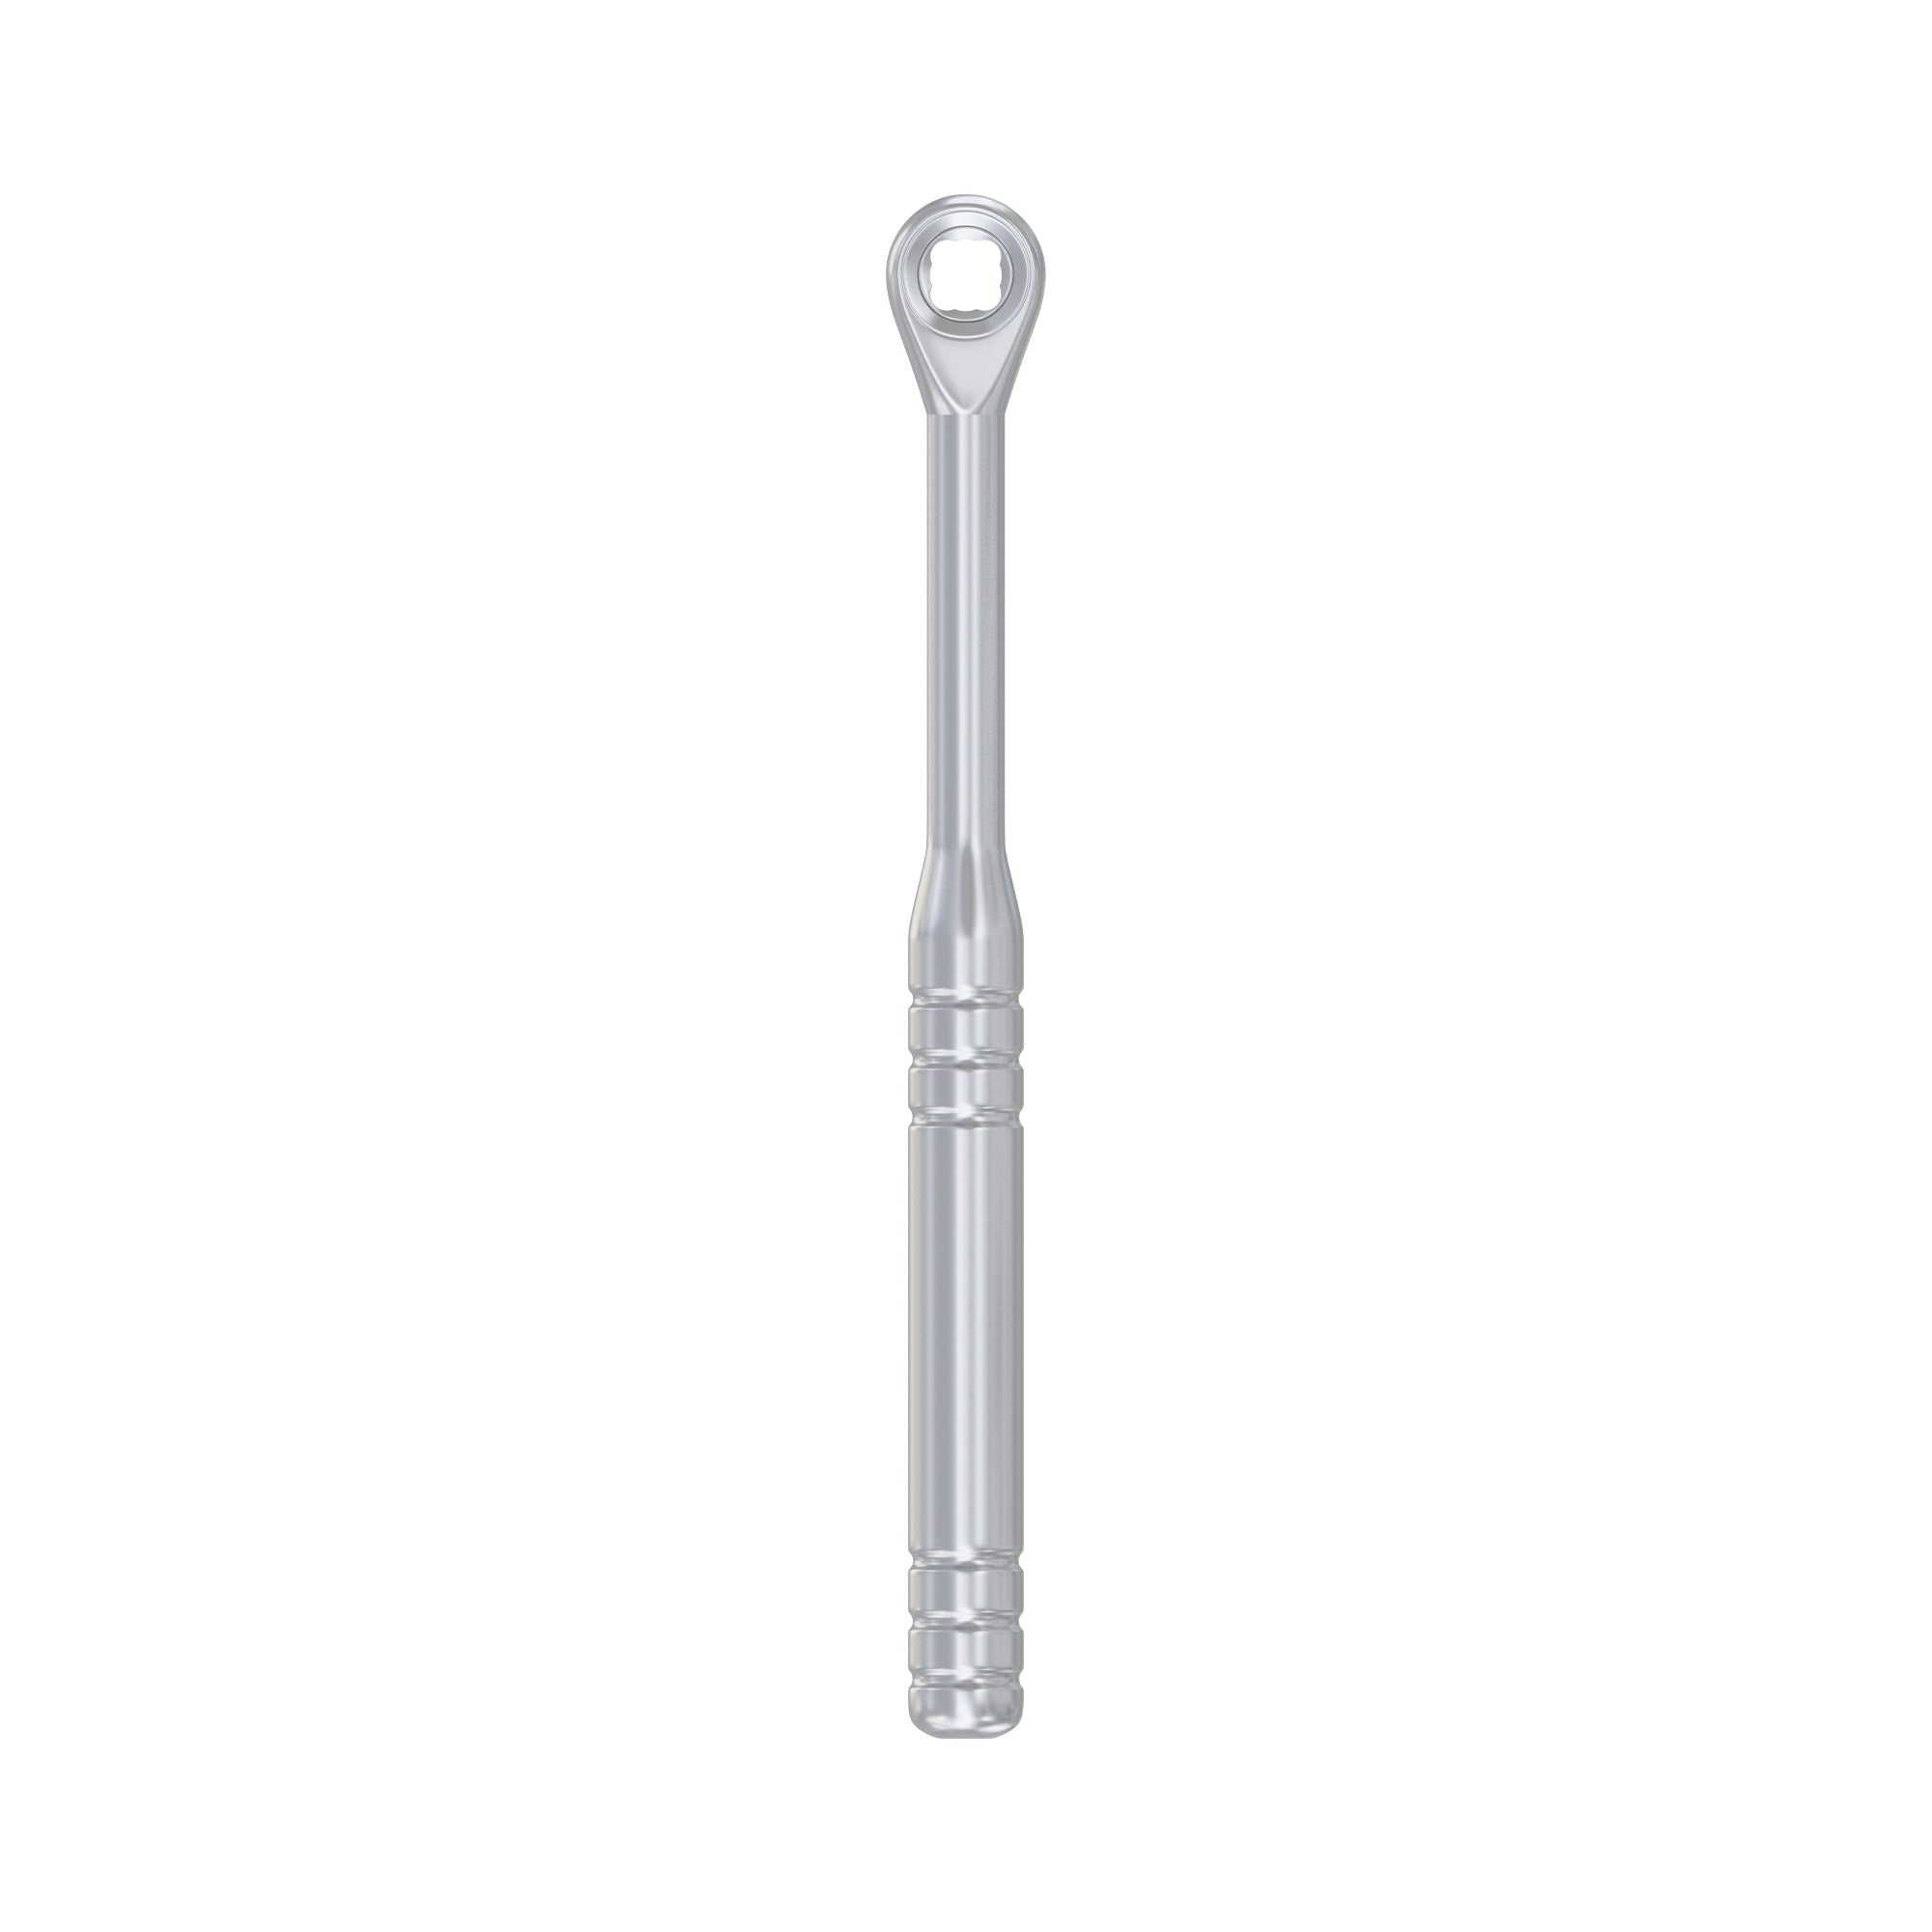 DSI Ratchet Wrench Driver Tool - Square Head Connection Ø4.00mm